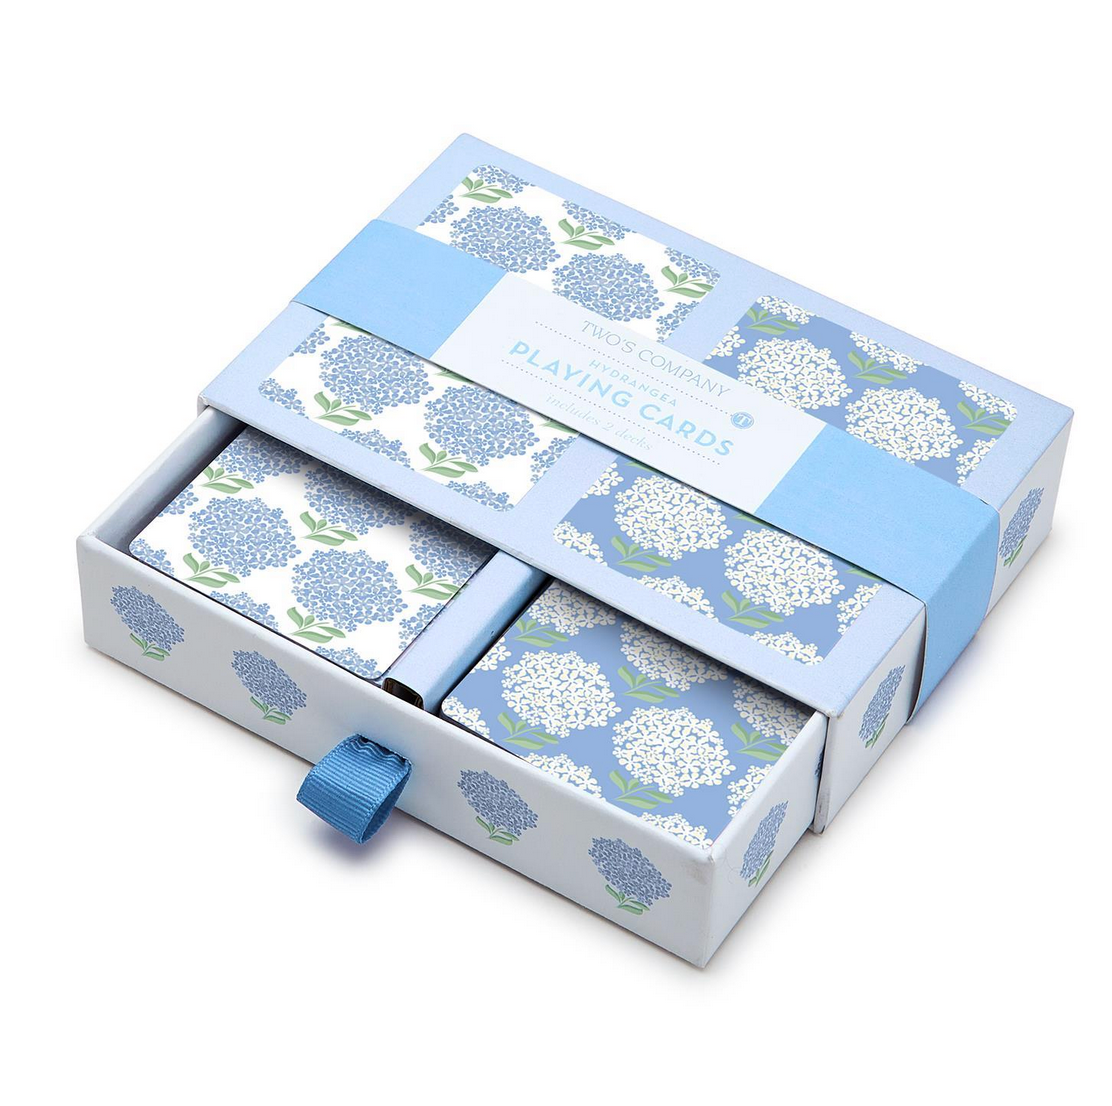 Hydrangea Double Deck Playing Cards